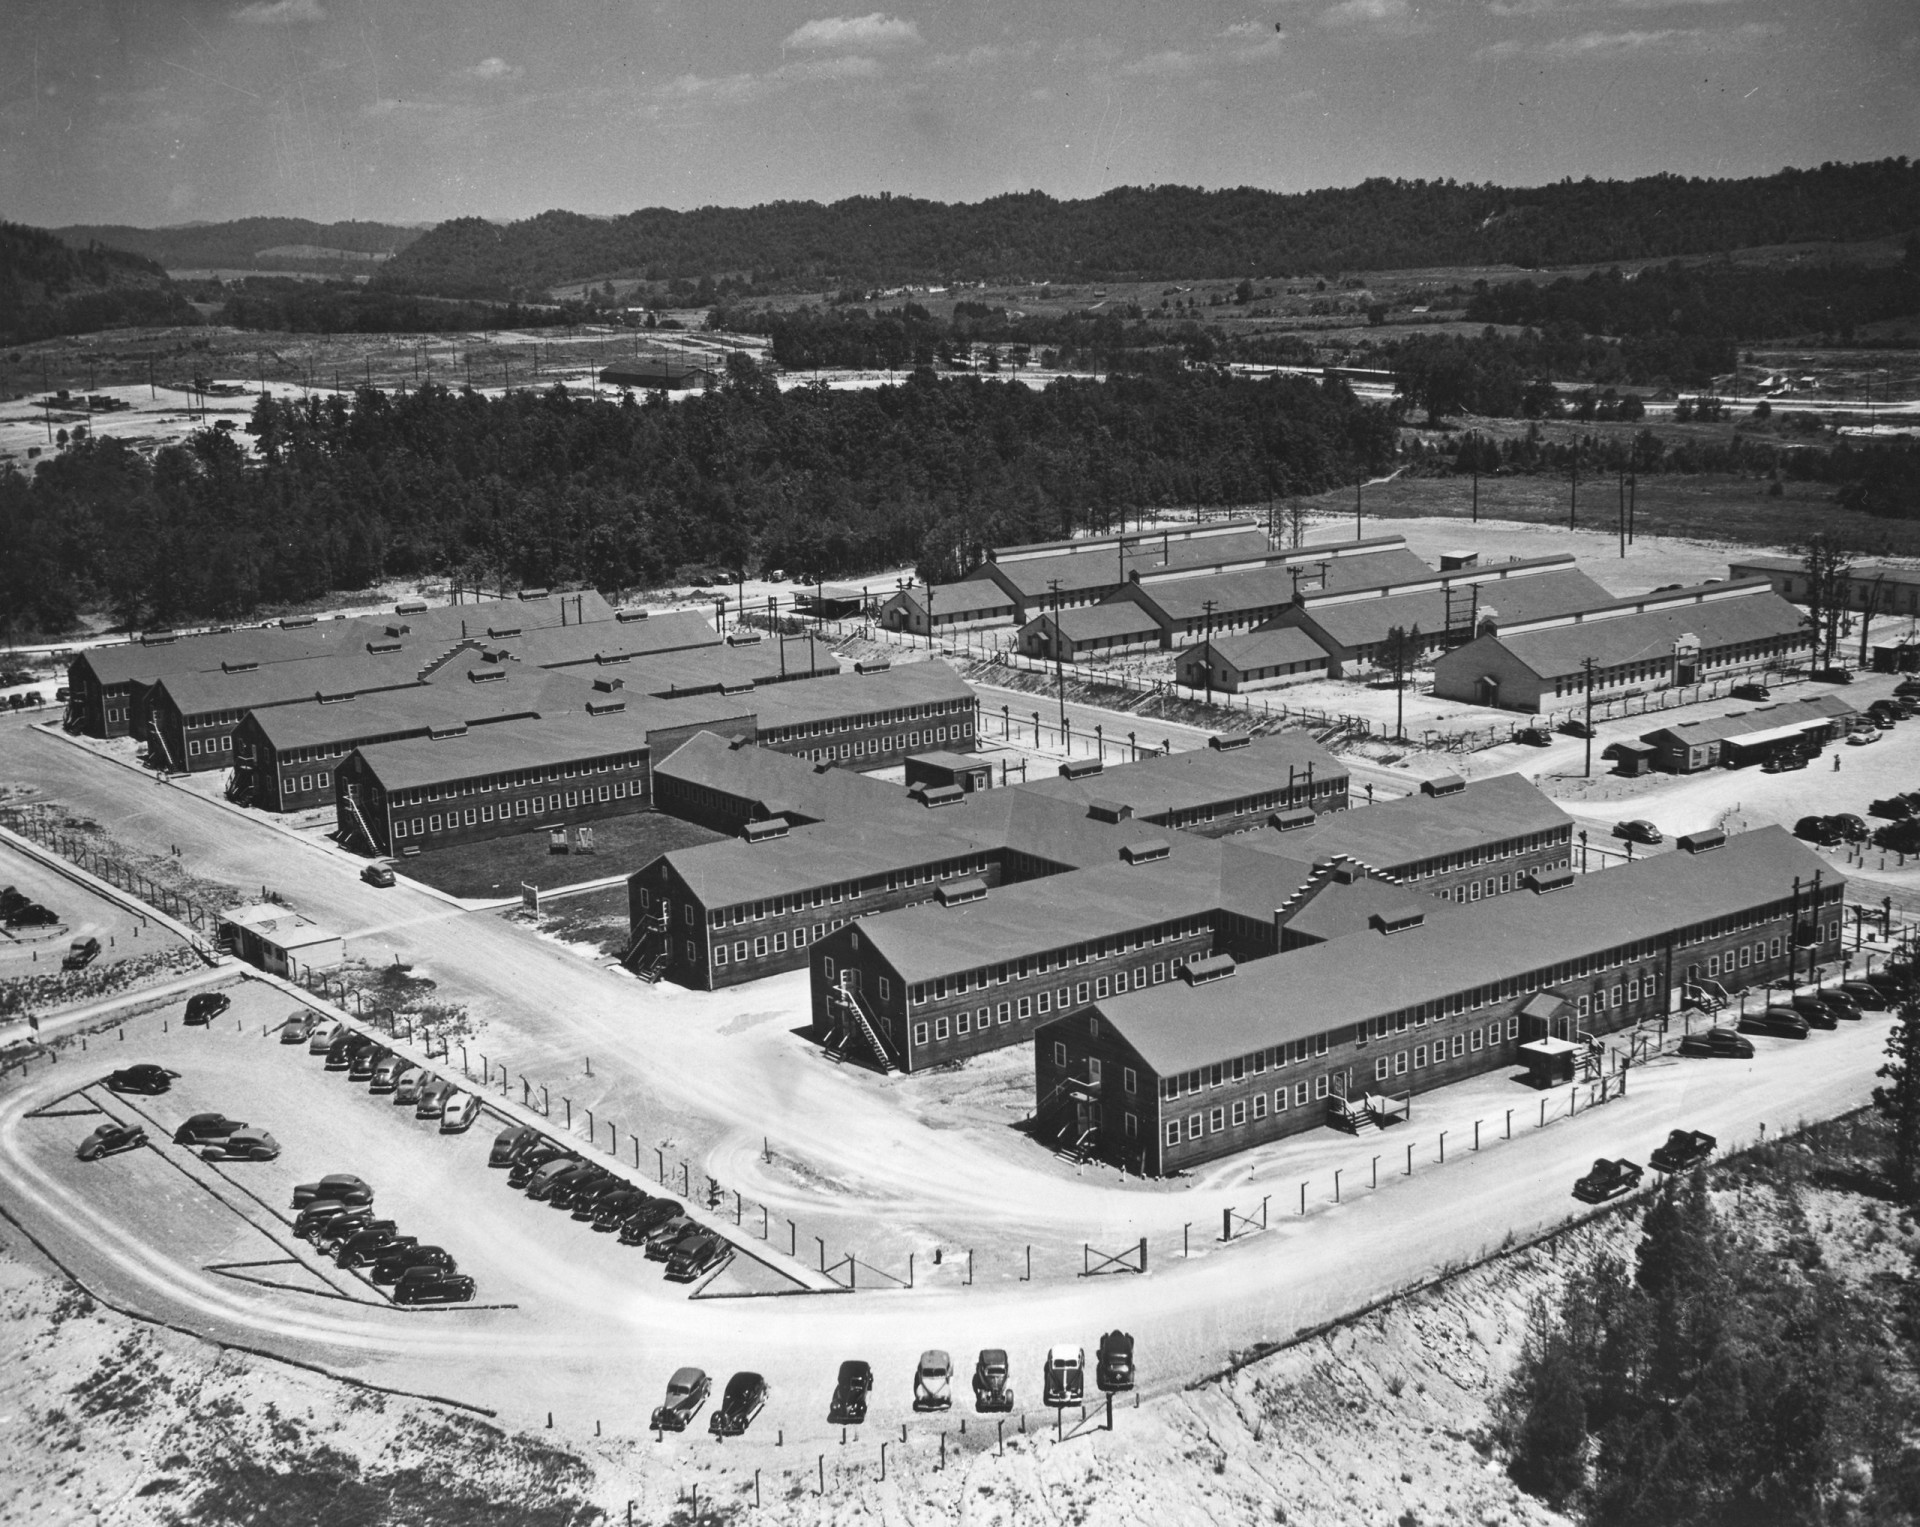 <p>The city of Oak Ridge was established by the US government in 1942 to serve as a home base for the Manhattan Project.</p><p>You may also like:<a href="https://www.starsinsider.com/n/487216?utm_source=msn.com&utm_medium=display&utm_campaign=referral_description&utm_content=686881en-us"> The highest-earning songs of all time</a></p>